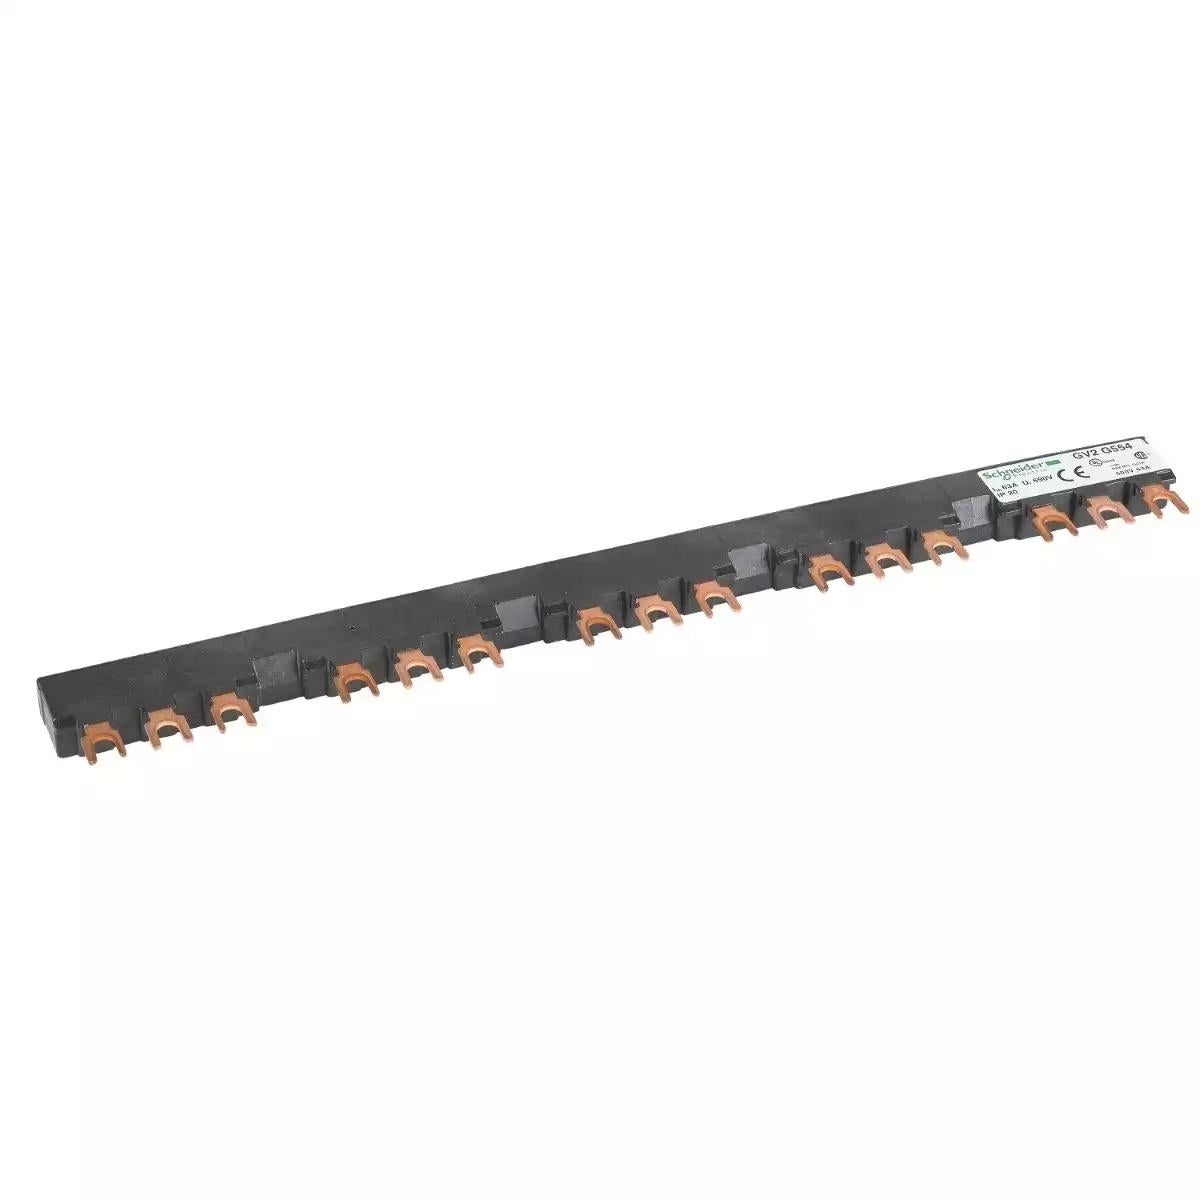 Linergy FT - Comb busbar - 63 A - 5 tap-offs - 54 mm pitch